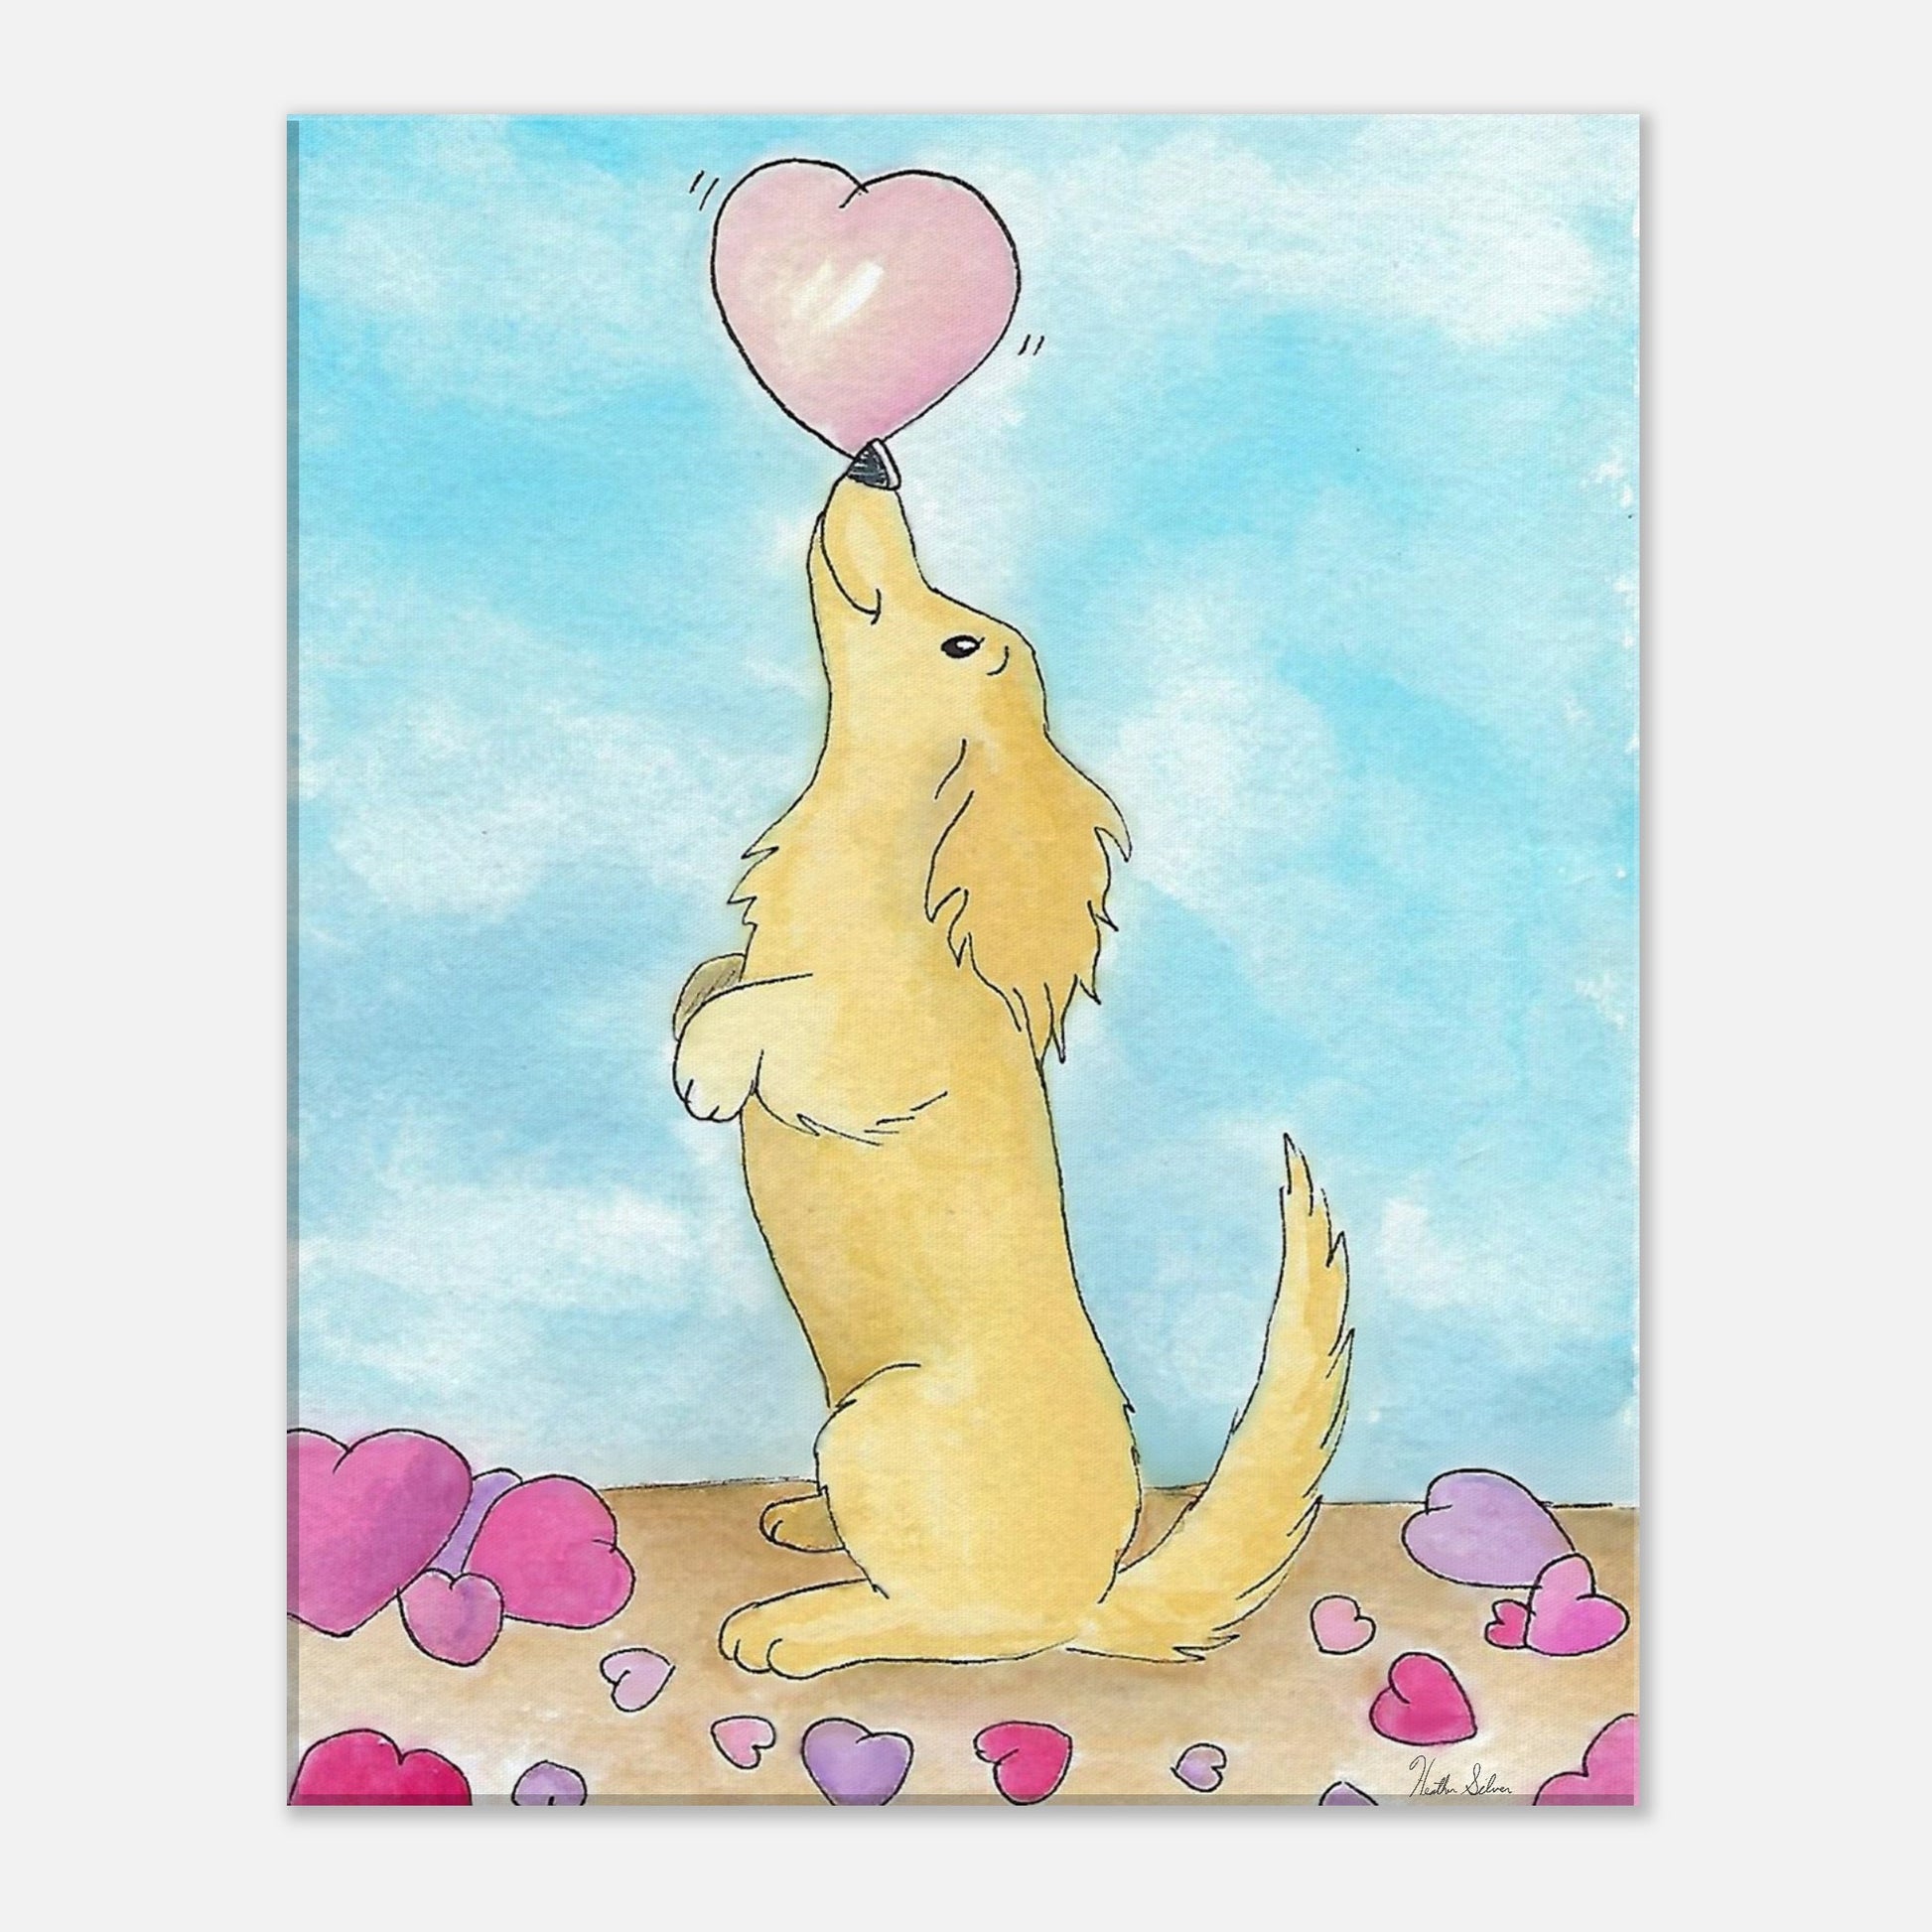 8 by 10 inch canvas wall art print of Heather Silver's watercolor painting, Puppy Love. It features a cute dog balancing a pink heart on its nose against a blue sky background.